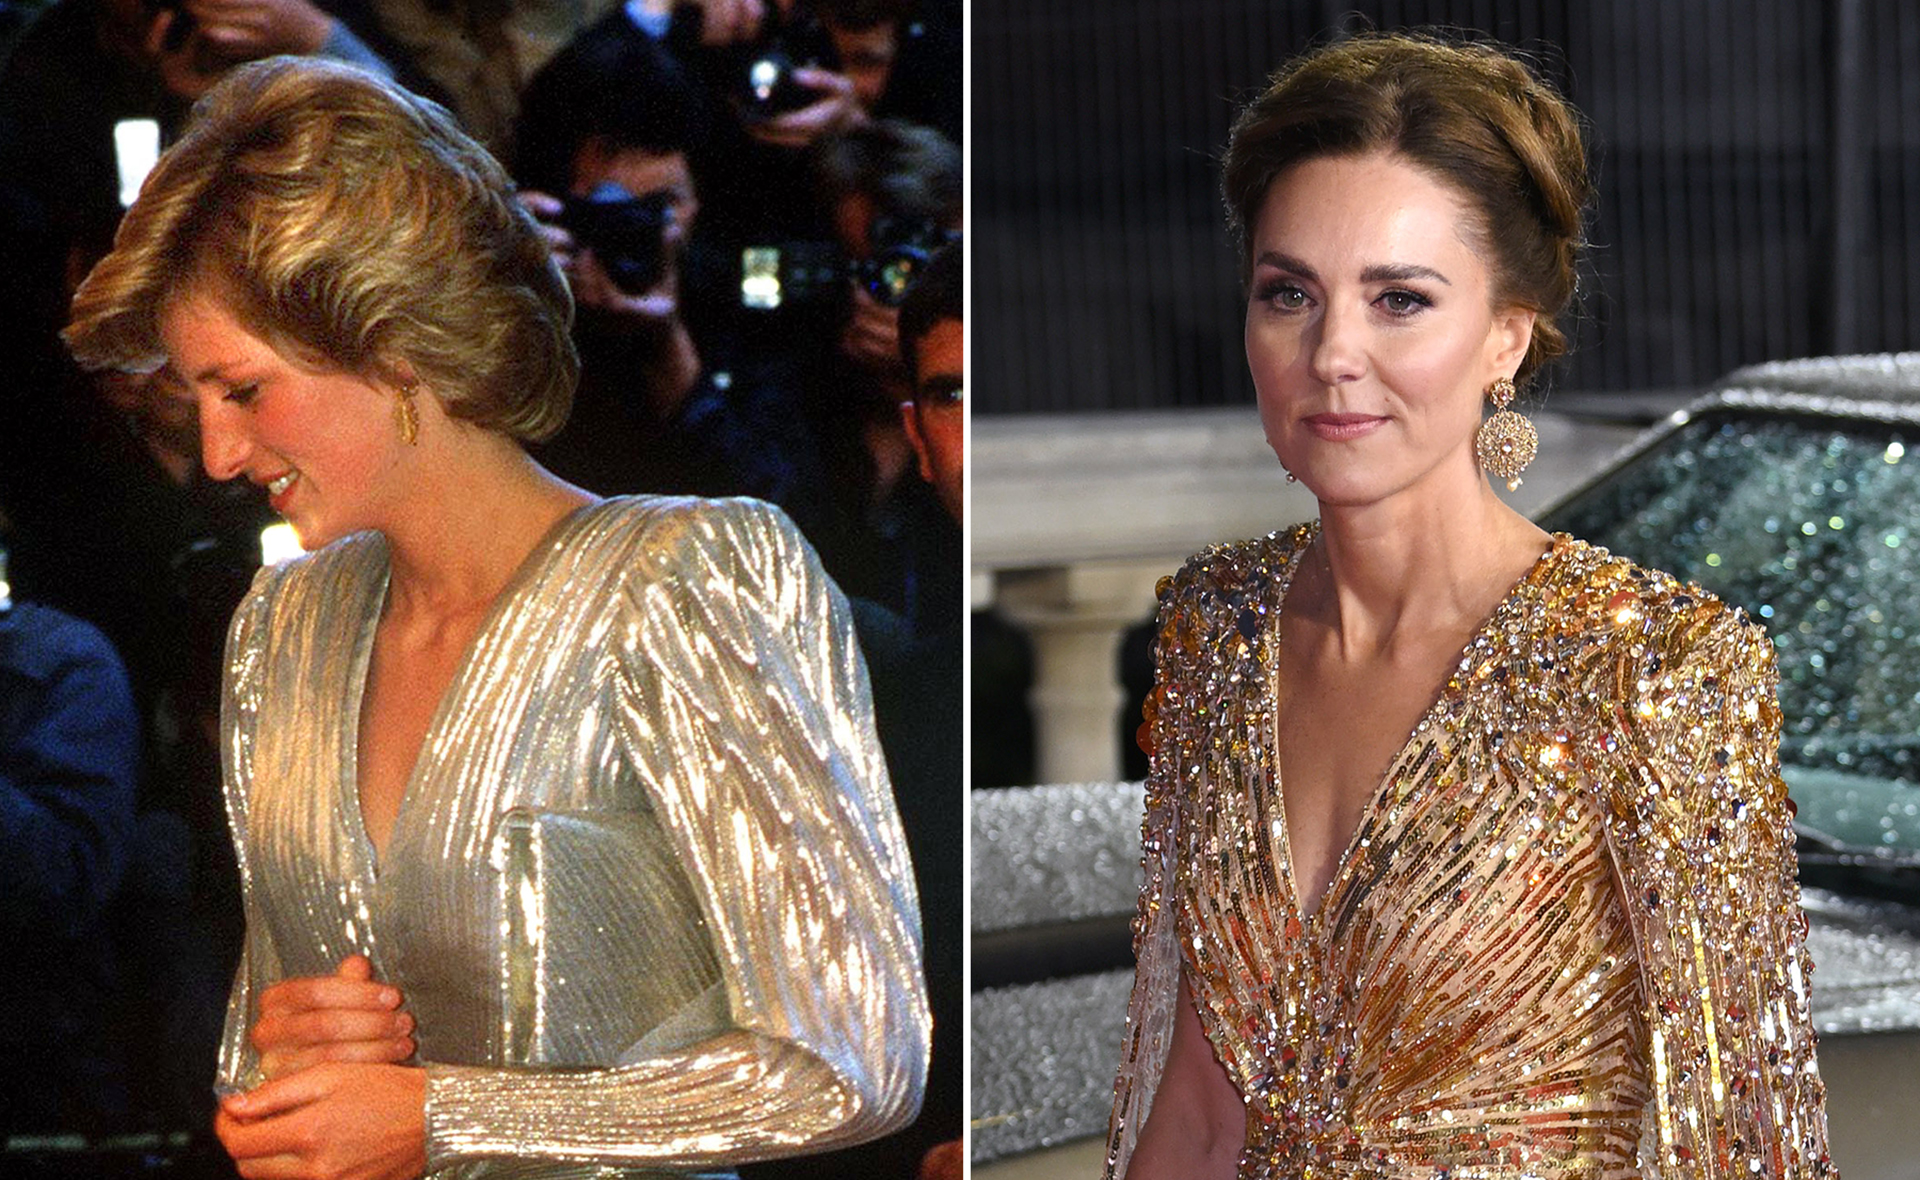 How Princess Diana inspired Duchess Catherine’s show-stopping gold gown at the James Bond premiere